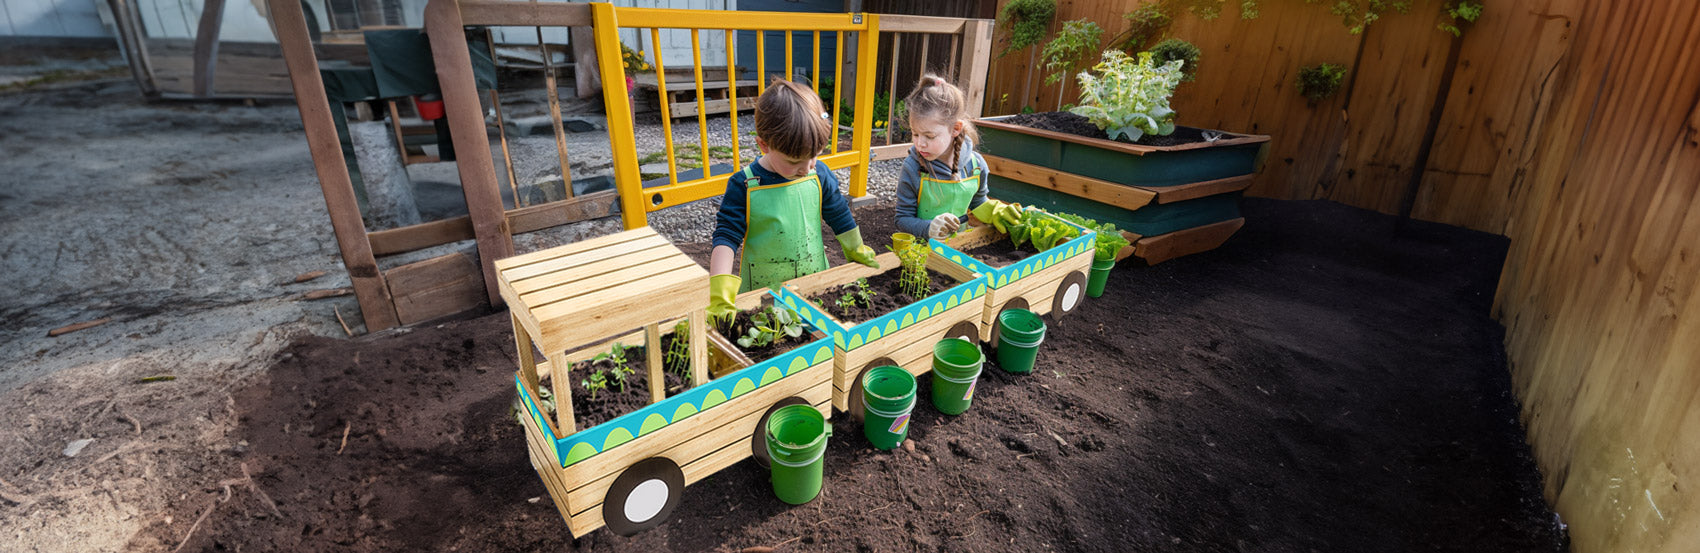 5 Easy Plants for Kids Garden Beds: Grow, Learn, and Play!